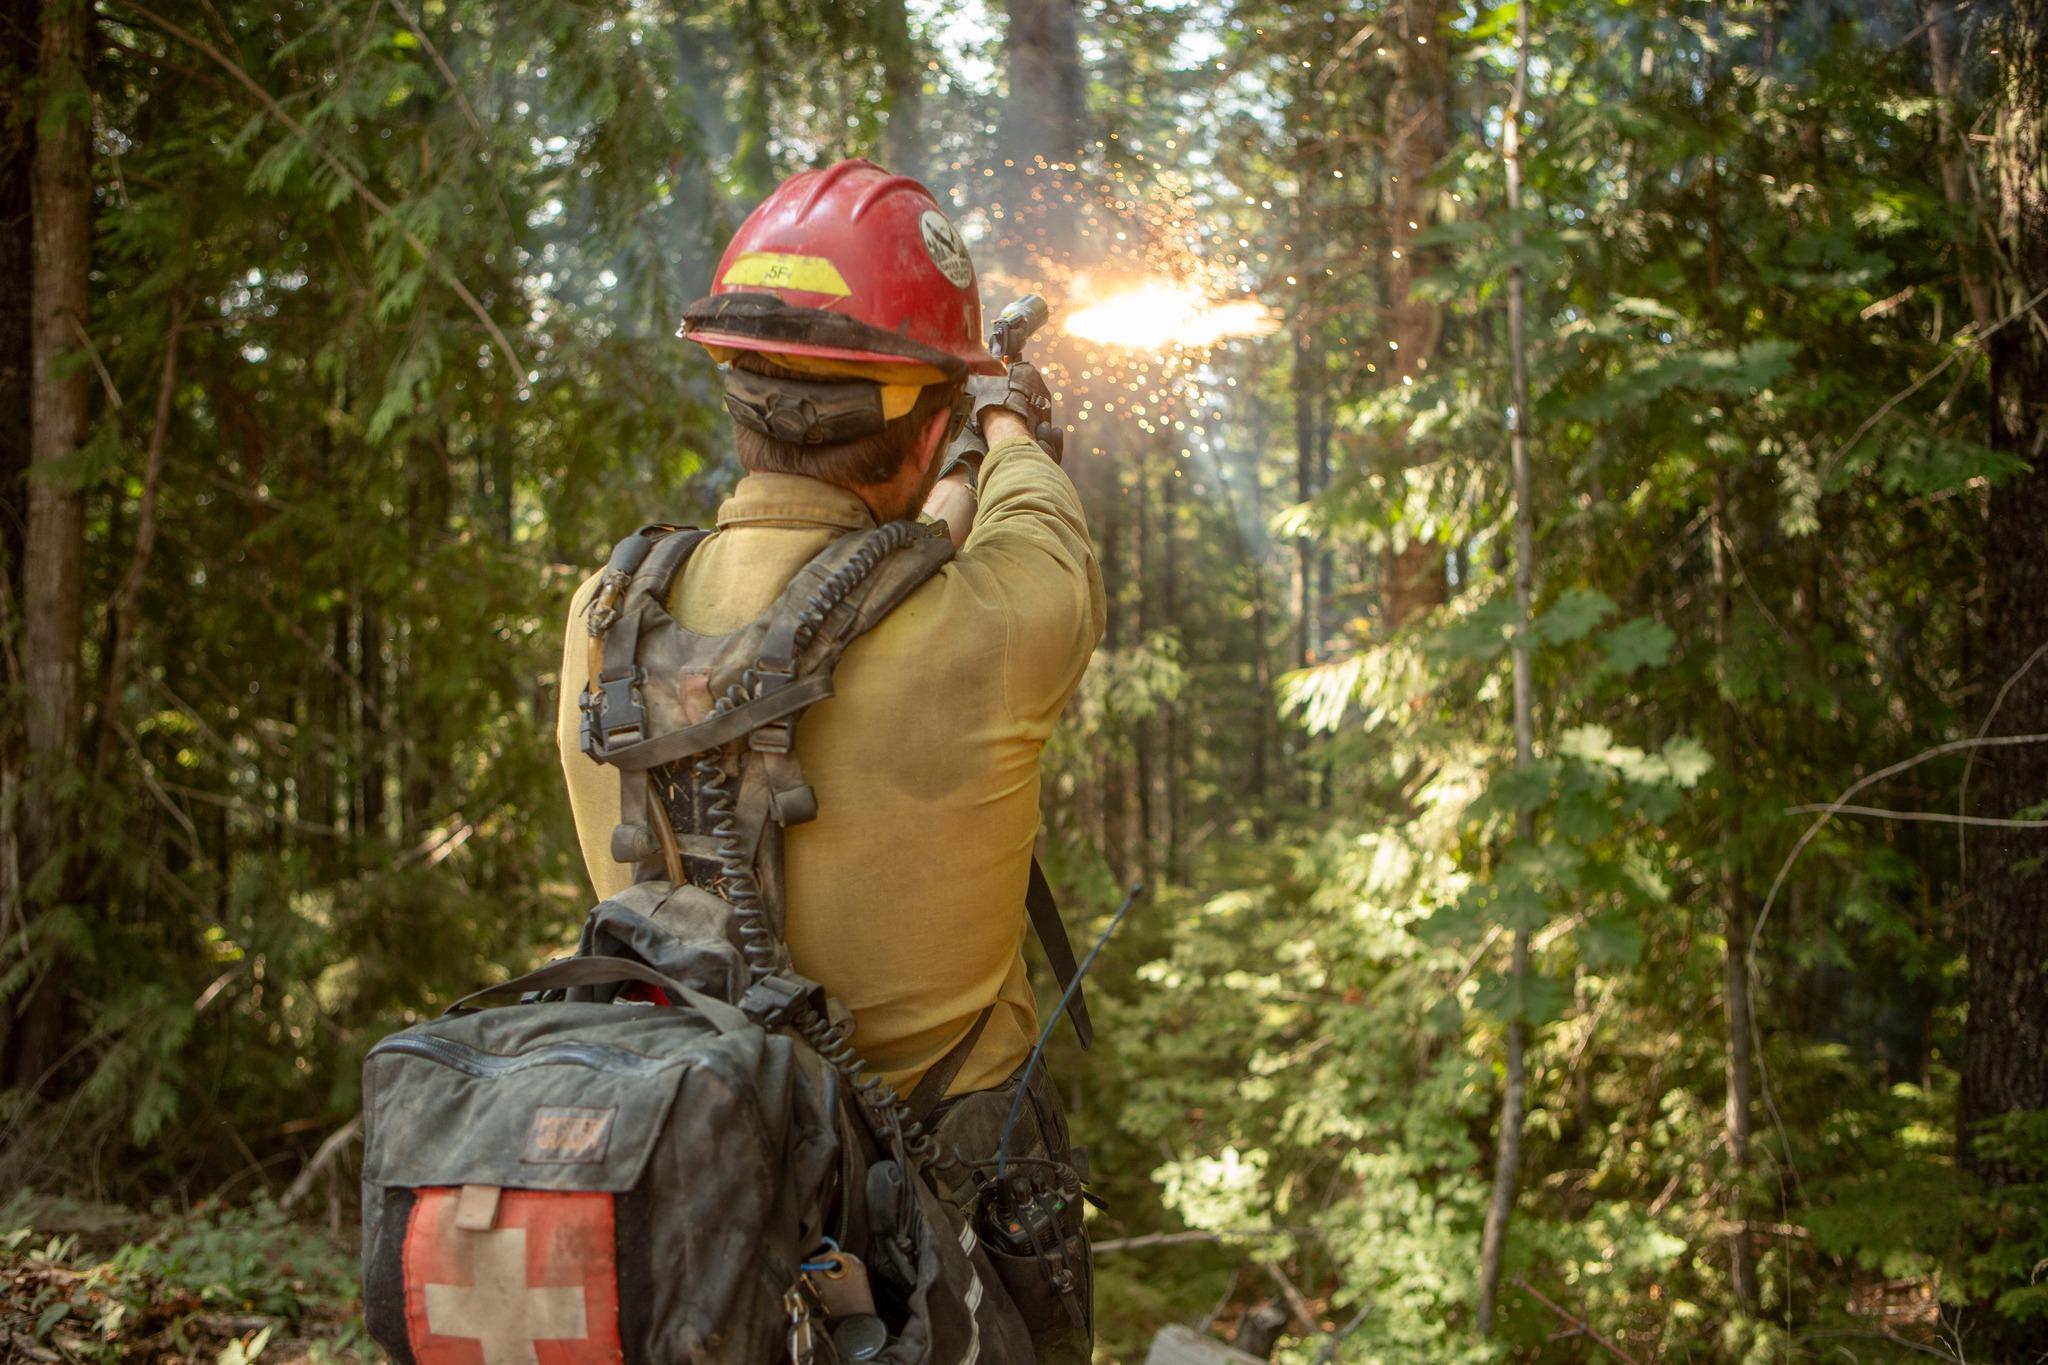 This is an image of a firefighter shooting a very pistol during backburn operations